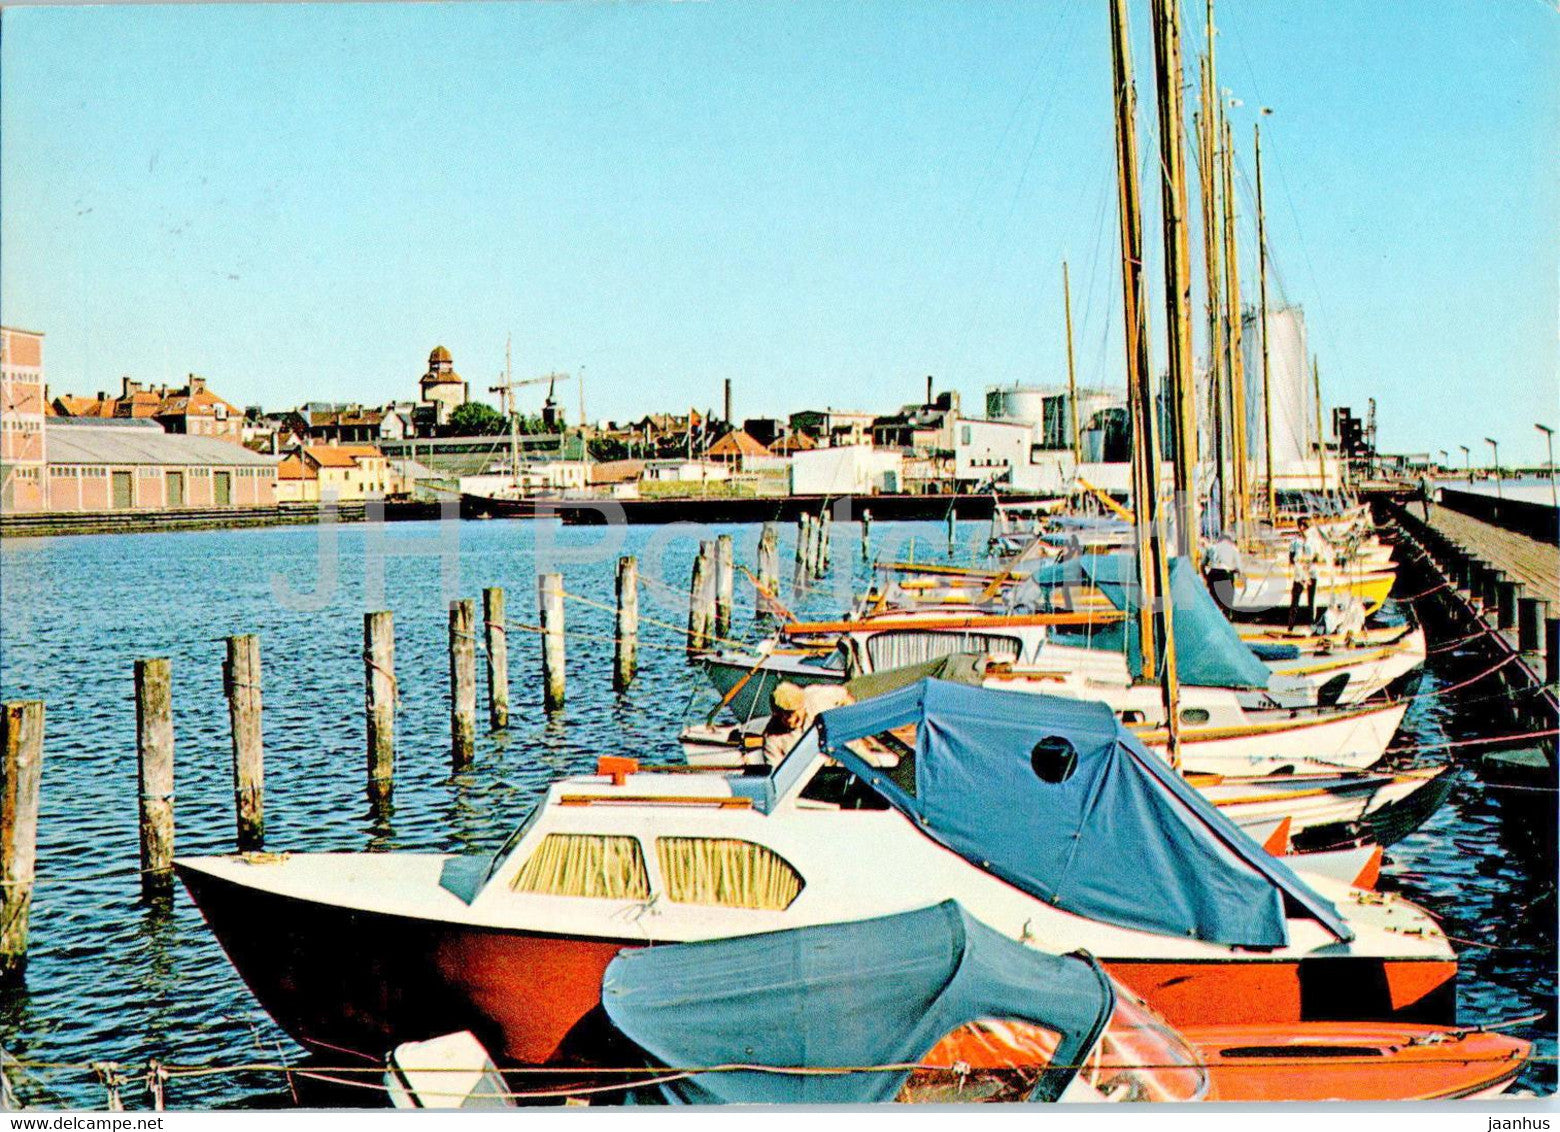 Nykobing - F Lystbaadehavnen - yachting harbour - boat - yacht - Denmark - used - JH Postcards